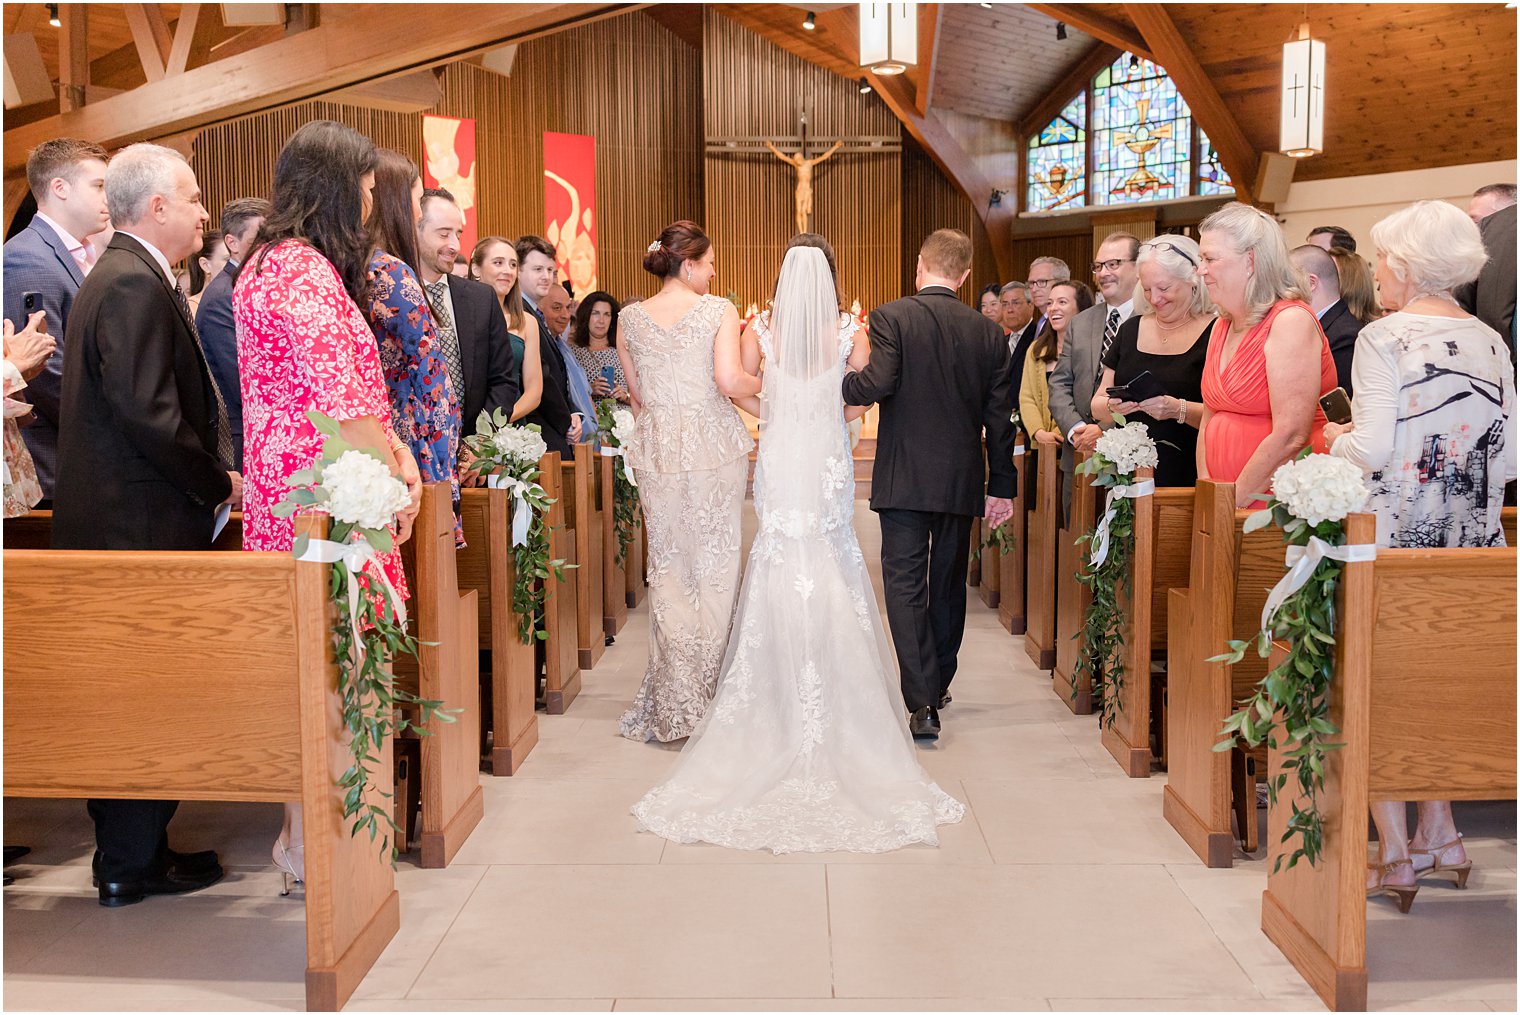 bride walks down aisle with parents for traditional church wedding ceremony in New Jersey